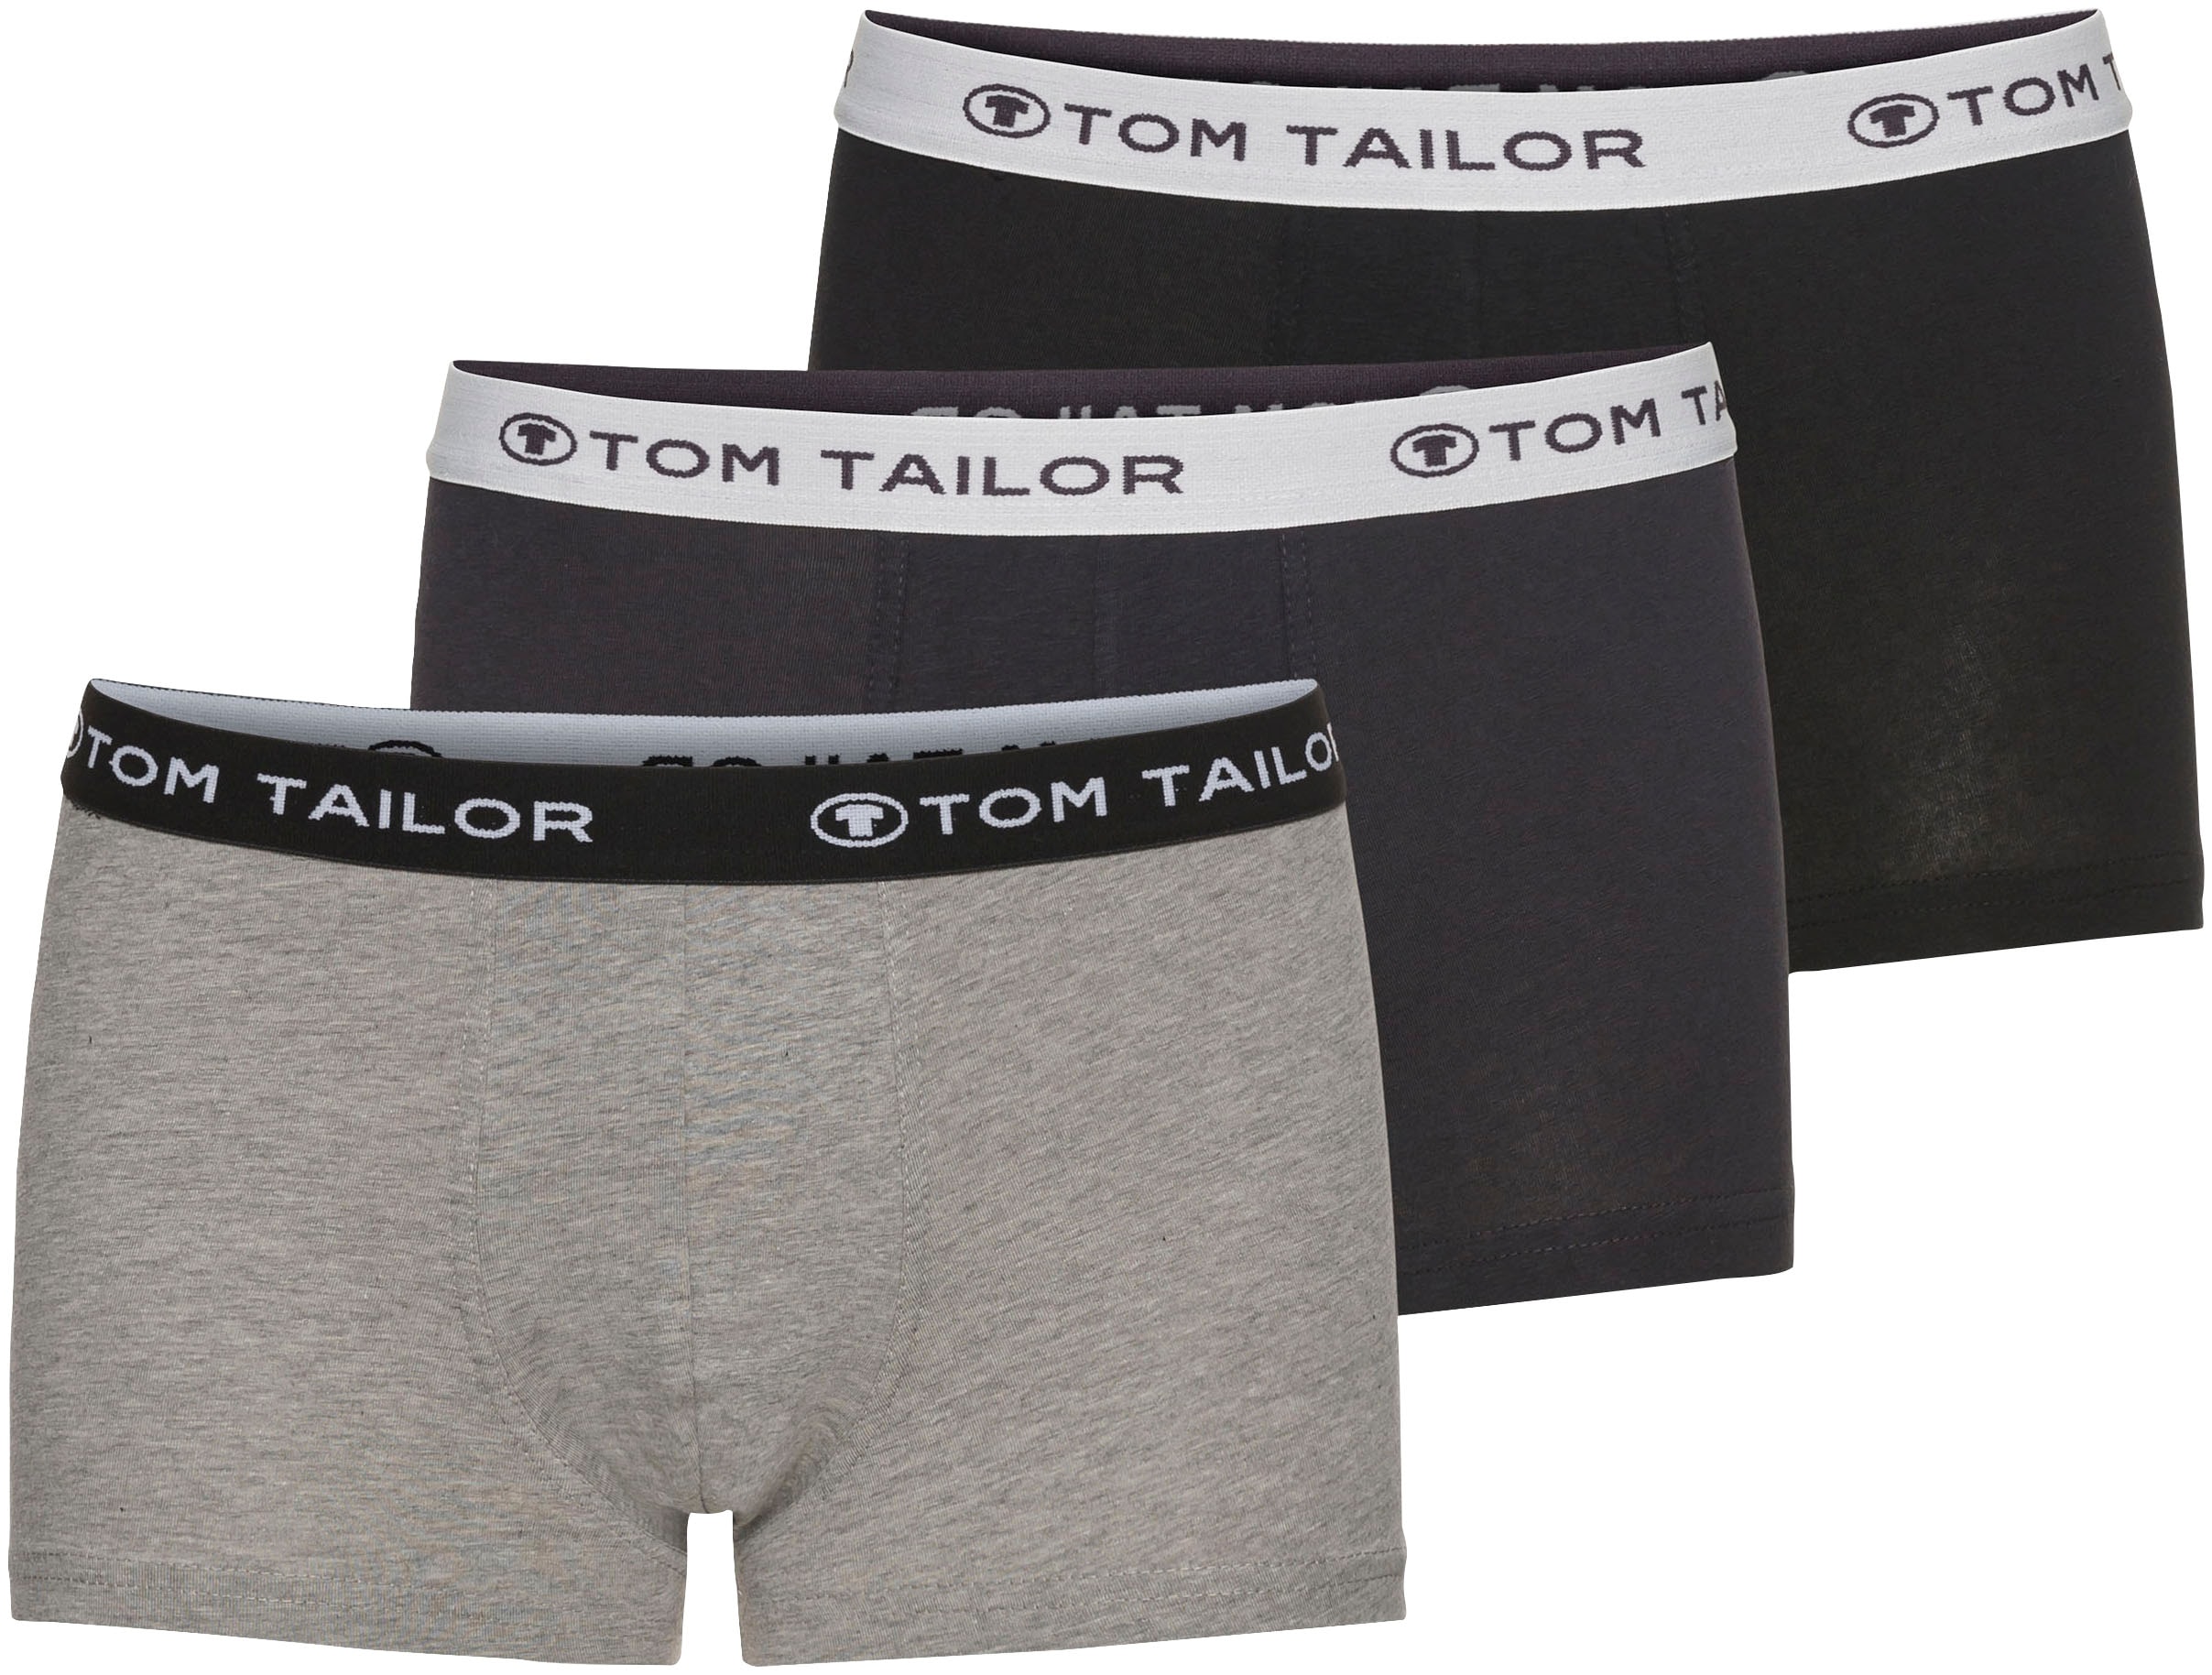 TOM TAILOR Boxershorts "Buffer", (Packung, 3 St.) 2